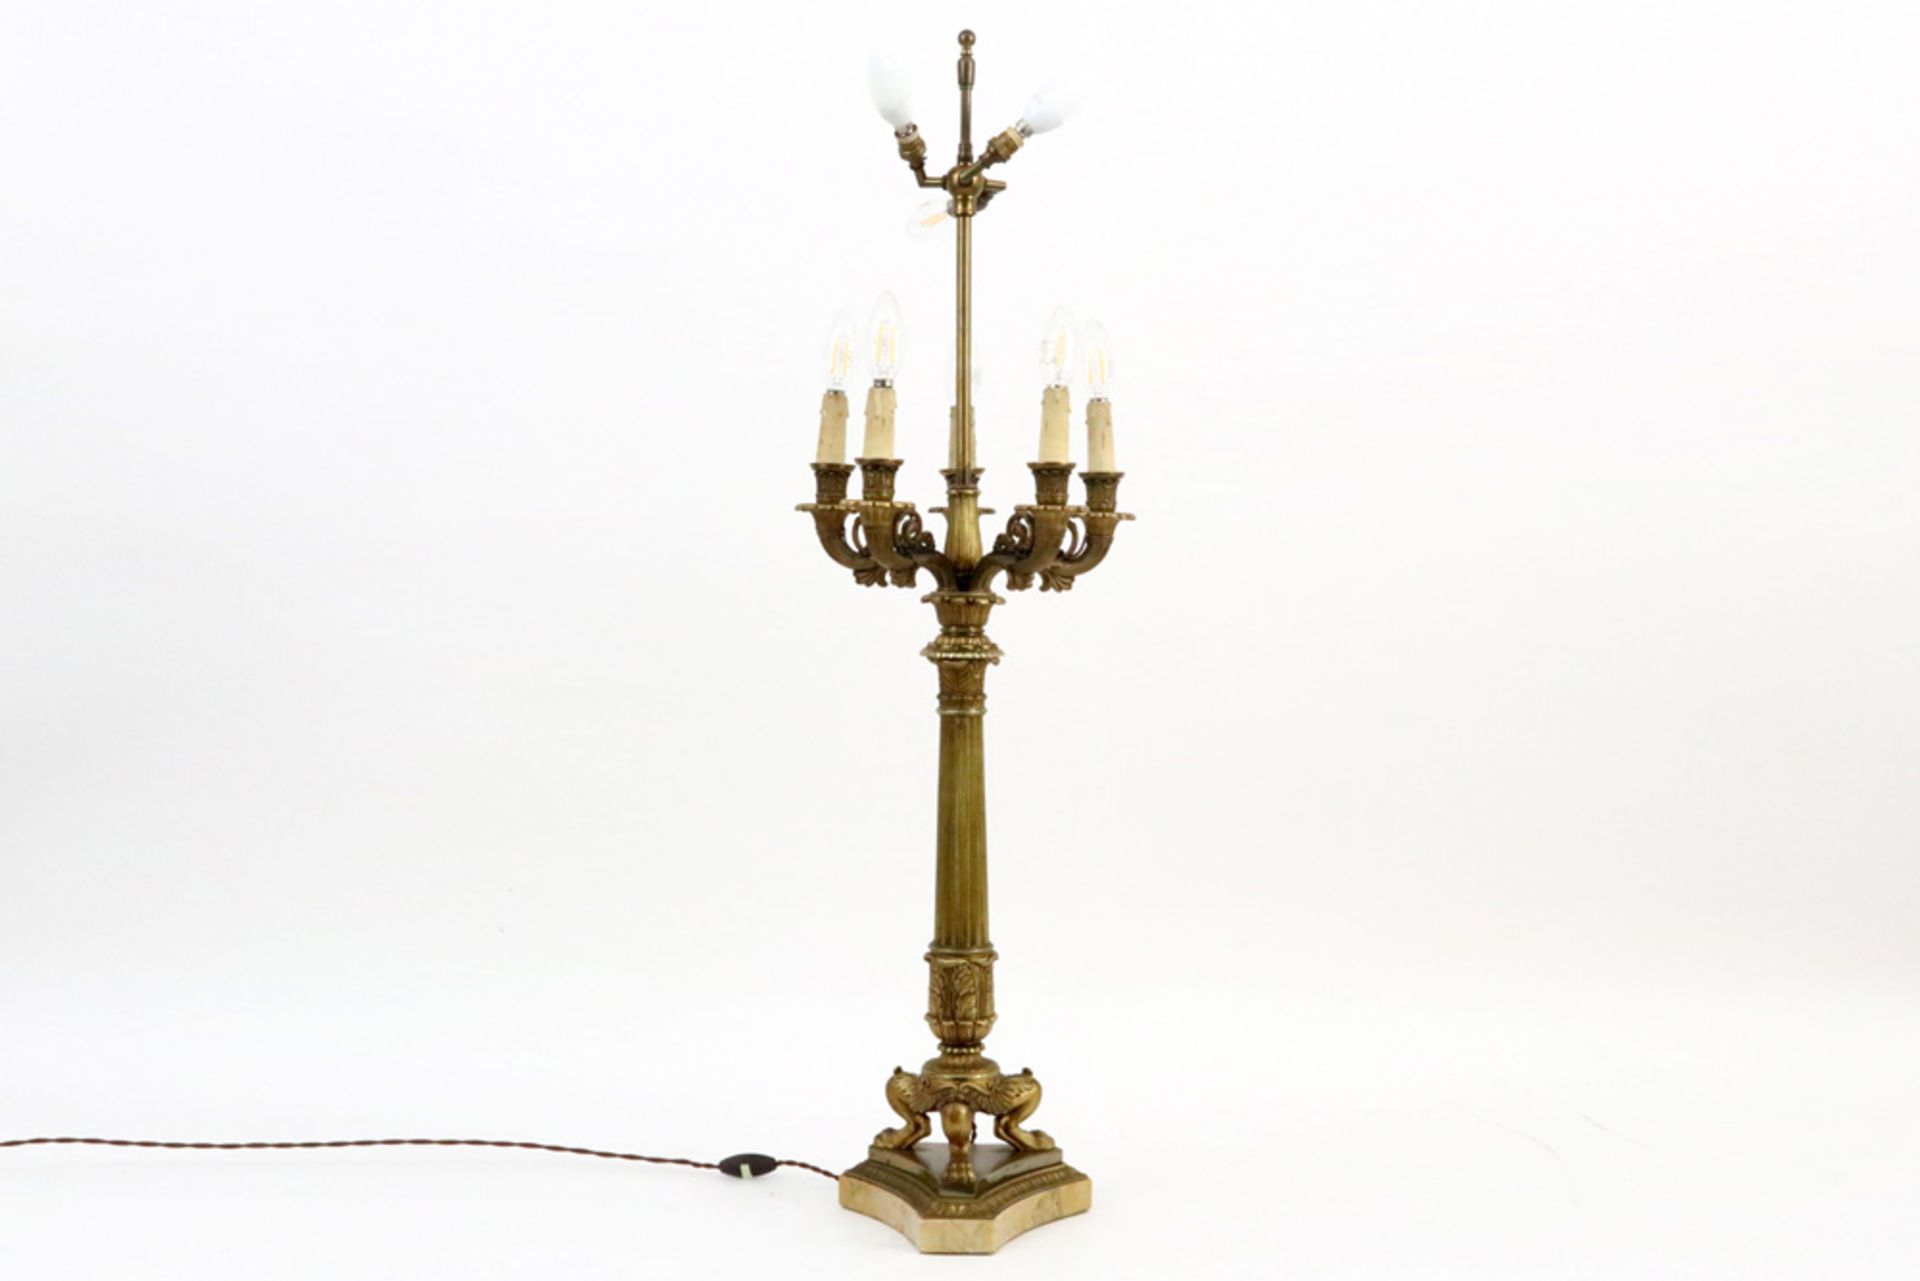 lamp with an 'antique' Empire style candelabra in gilded bronze on a marble base || Schemerlamp - Image 2 of 4